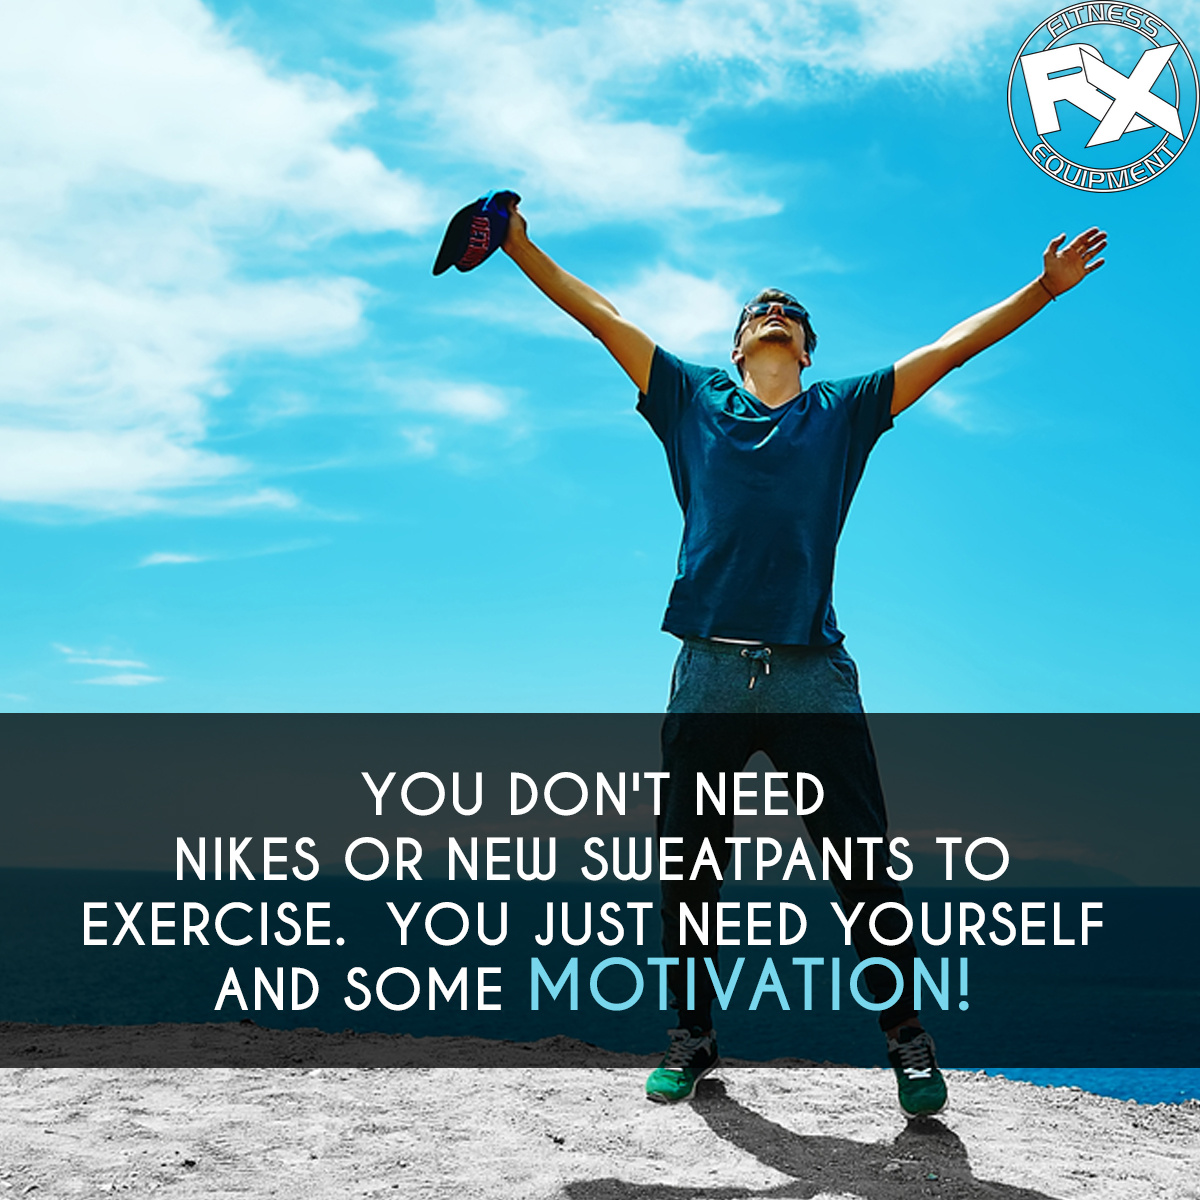 All you need to achieve a new level of health and wellness is your own motivation and determination. #rxfitnessequipment #fitnessequipment #exerciseequipment #strengthtraining #fitnessgoals #fitnessmotivation #fitfam #personaltrainer #getfit #instafitness